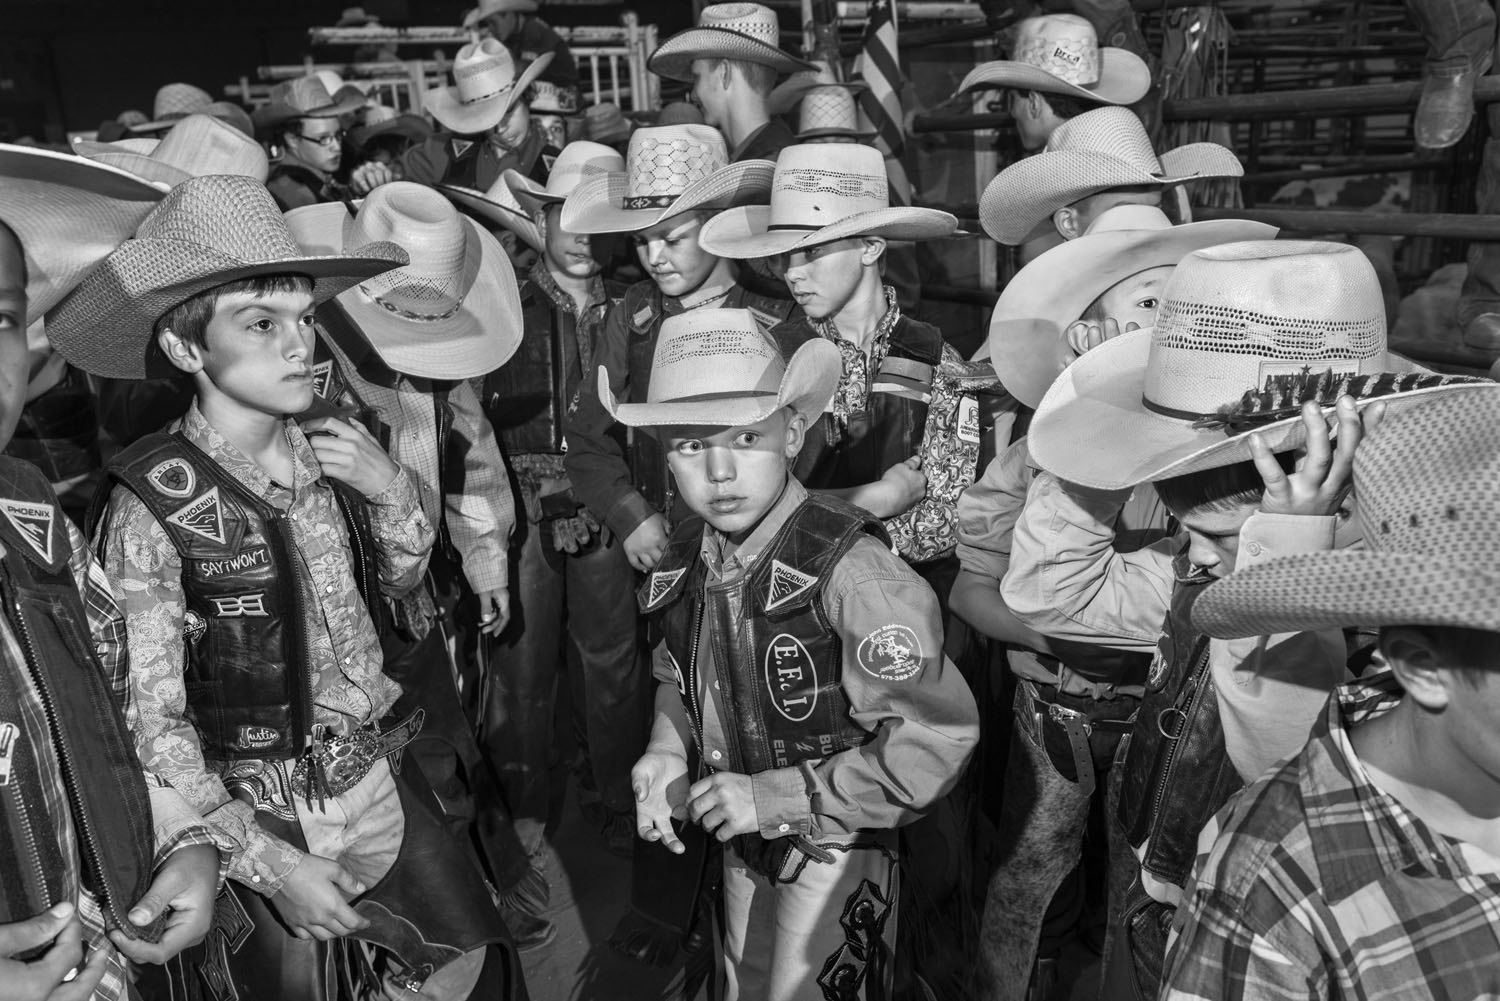 August 2, 2014: Finalist mutton busters and calf riders wait in the arena alley before the invocation and their introduction on the final day of competition.